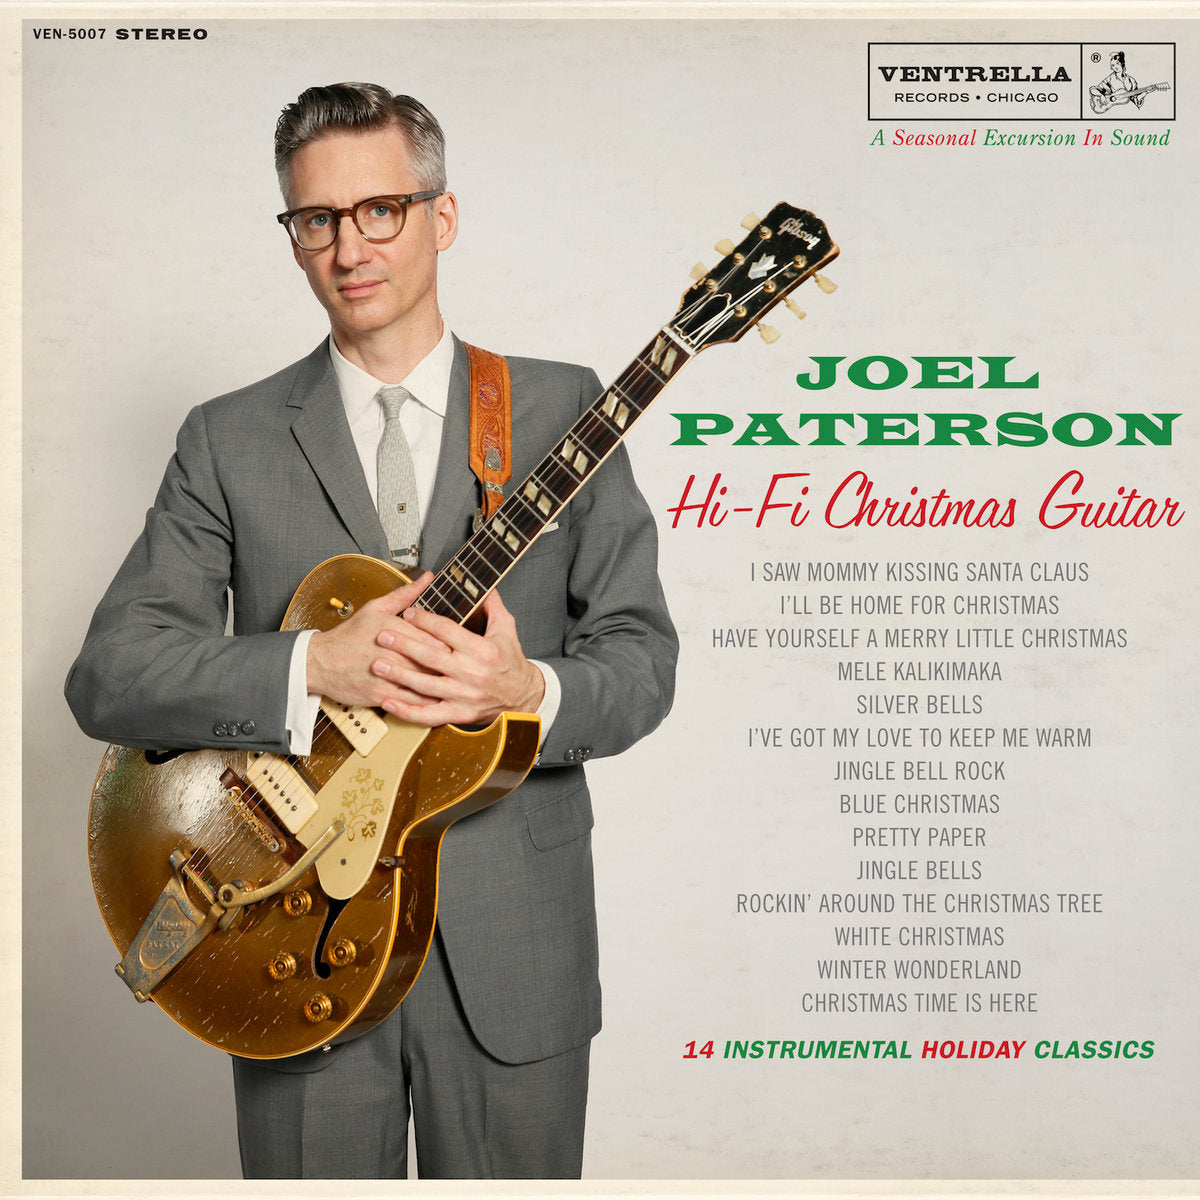 Album cover for Joel Paterson - Hi-Fi Christmas Guitar, featuring the artist in a suit, glasses, and holding a gold electric guitar, set against a textured beige background with track listings. This